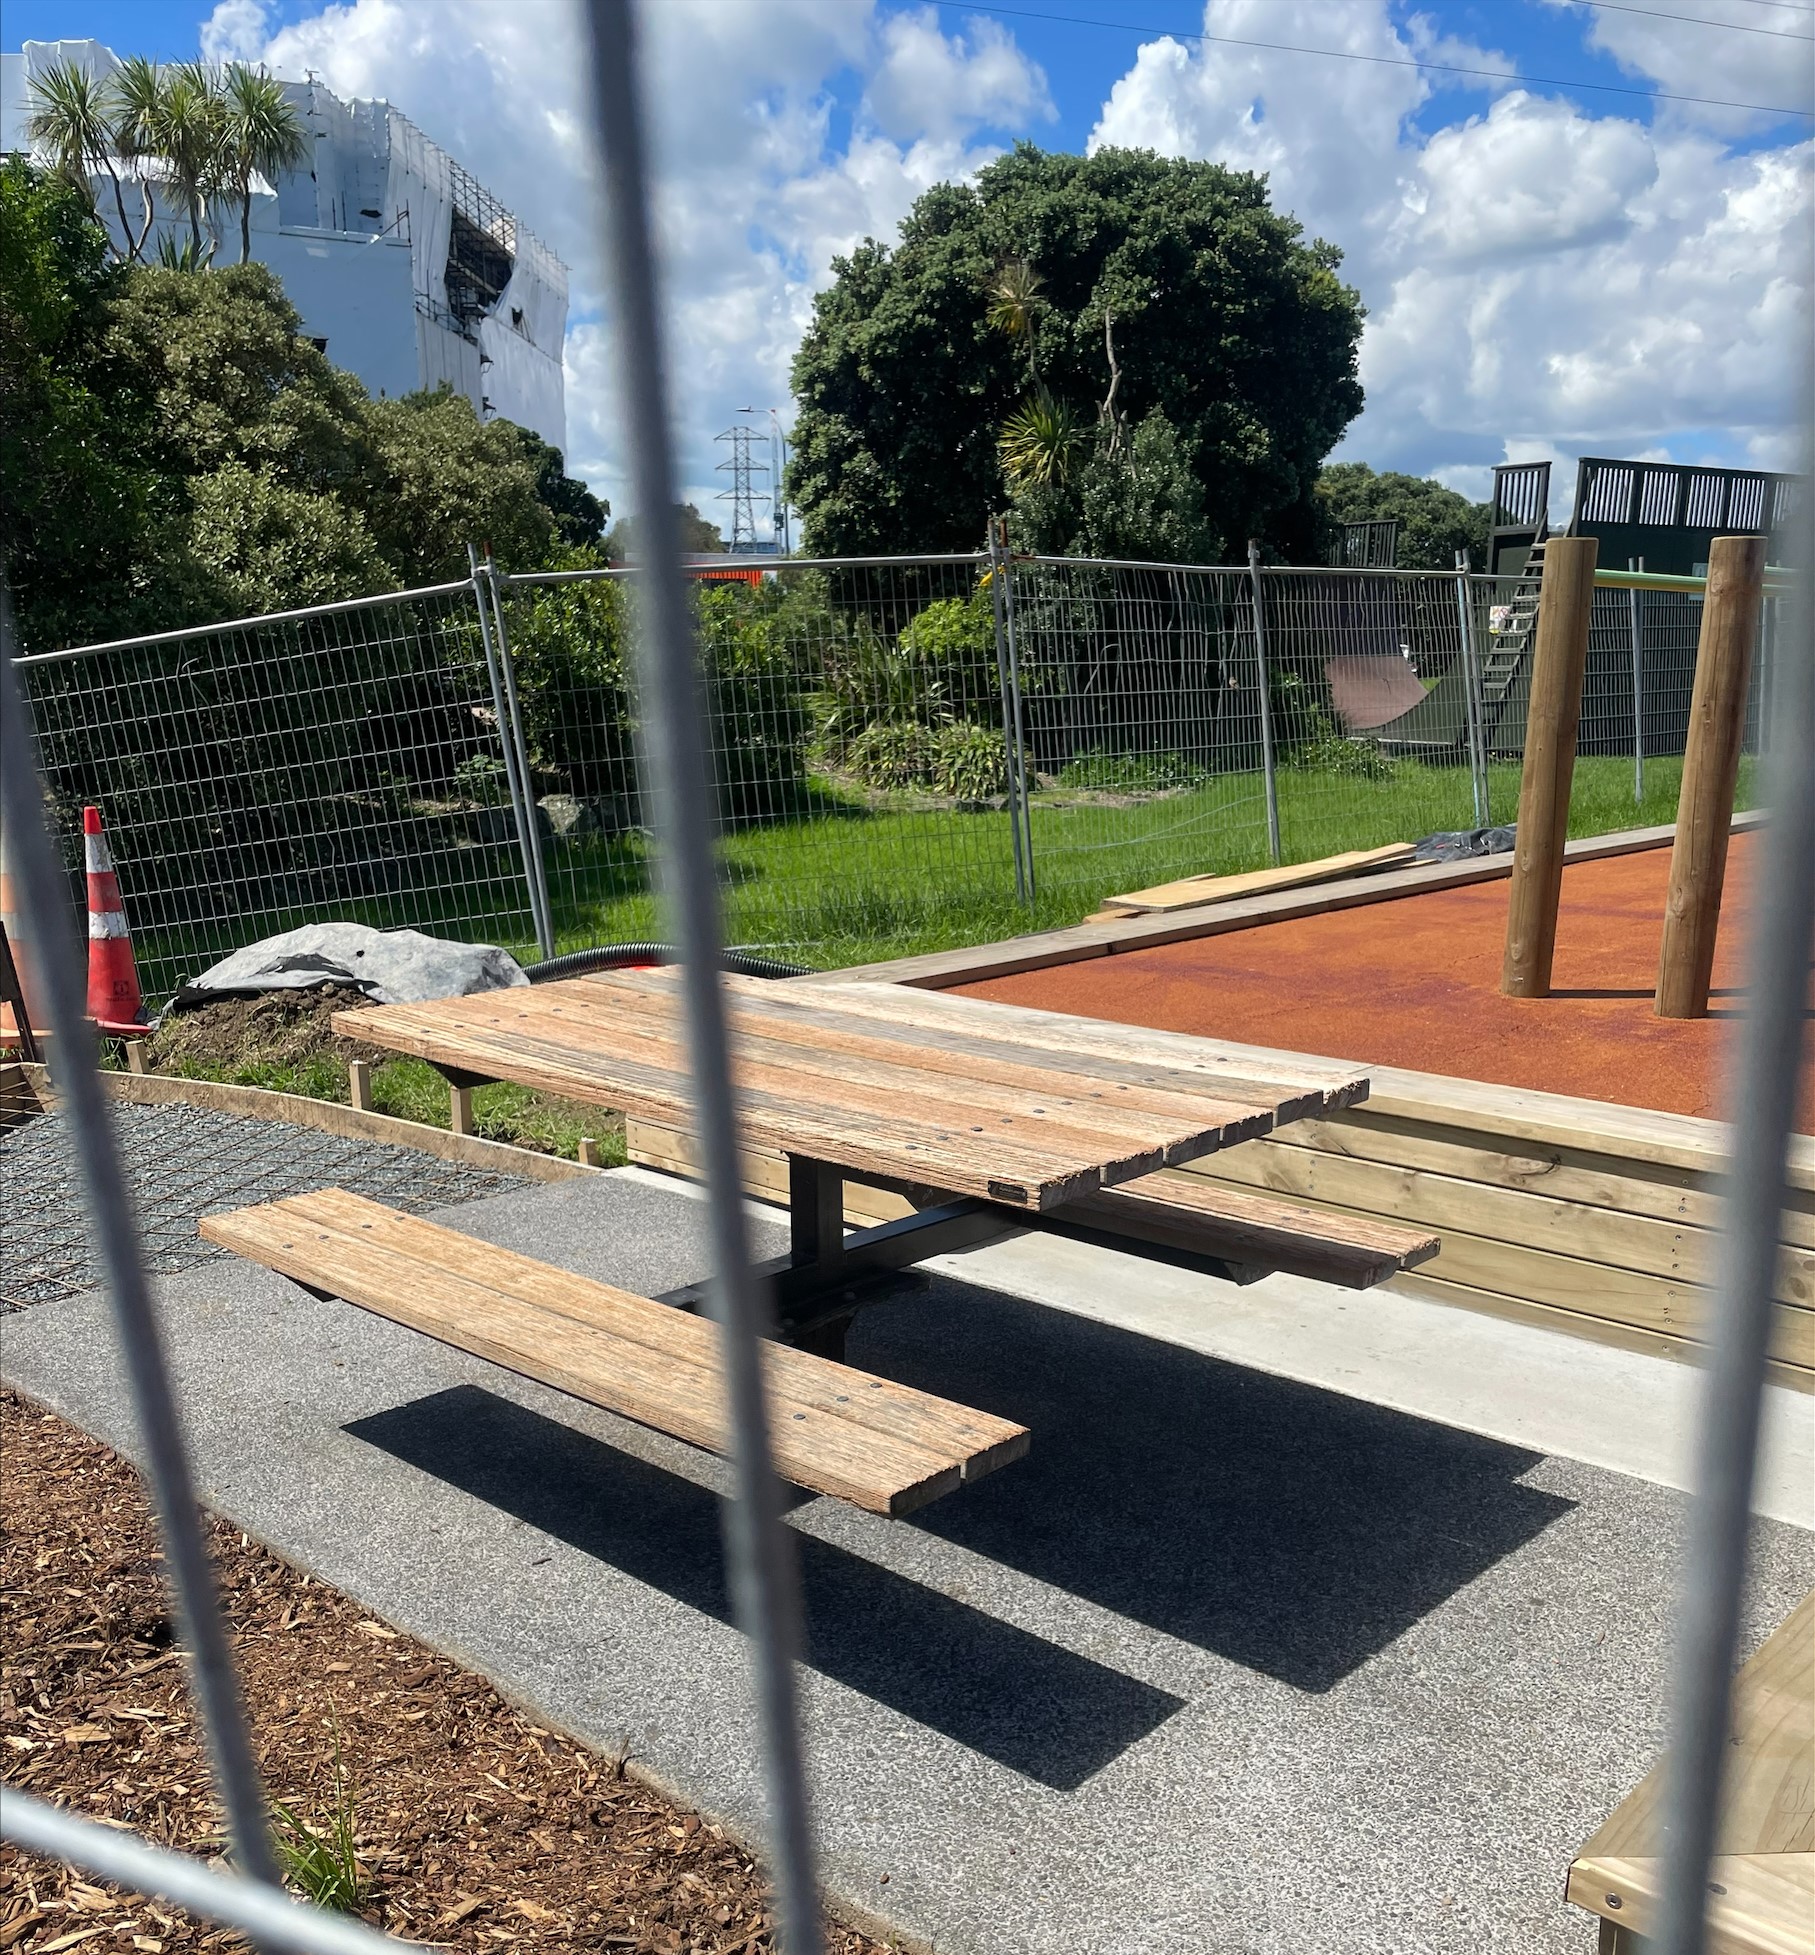 New picnic table next to outdoor fitness equipment at Onehunga Bay Reserve